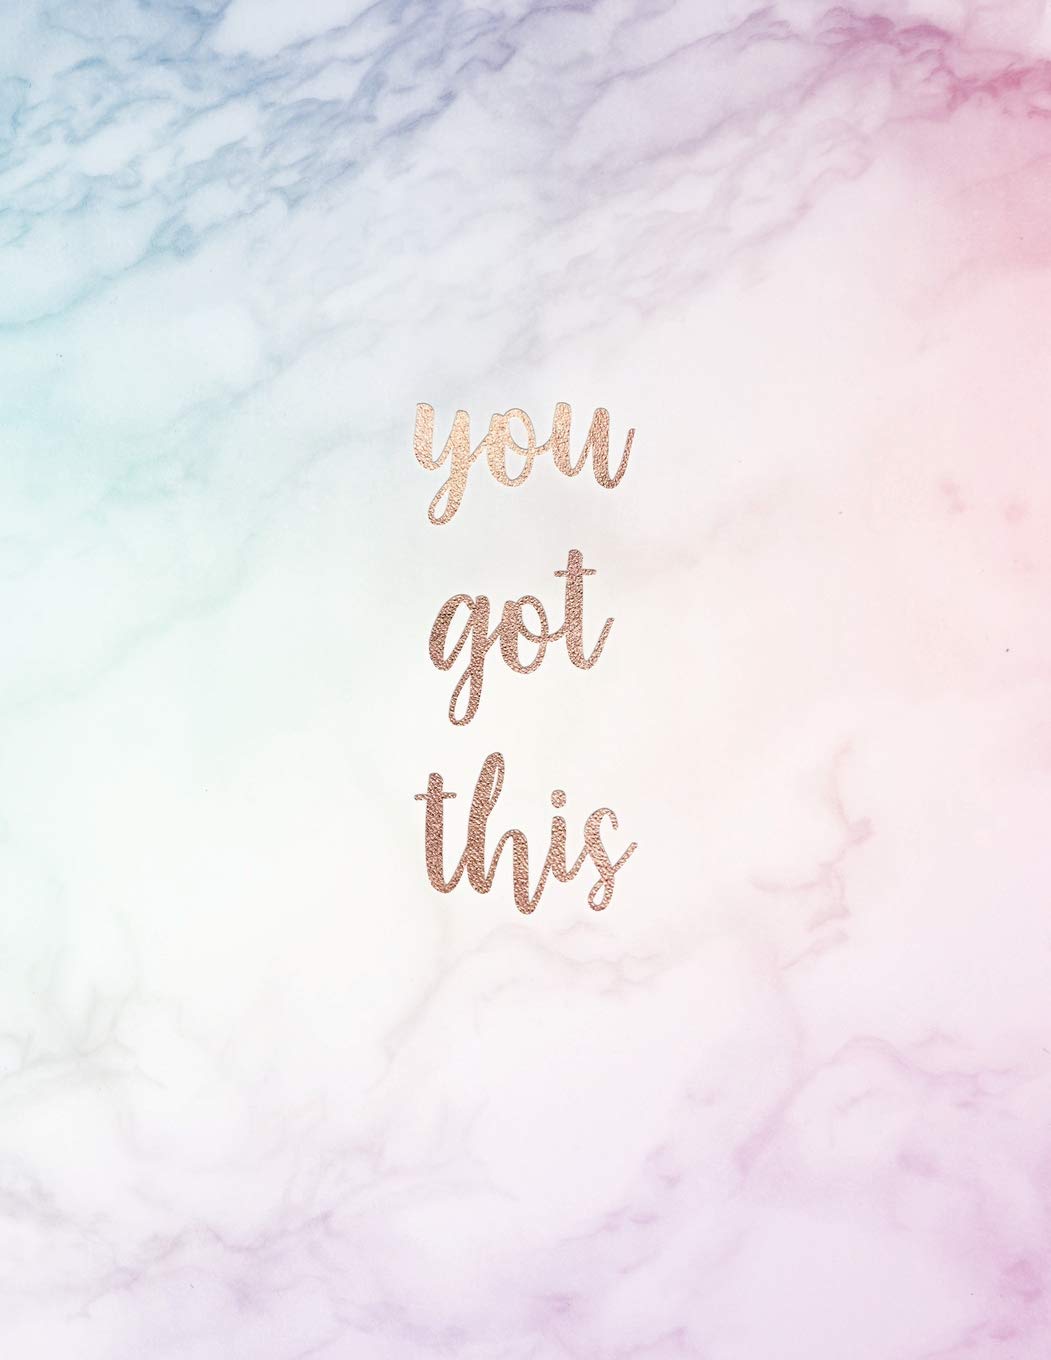 Rose Gold Quotes Wallpapers Top Free Rose Gold Quotes Backgrounds Wallpaperaccess Saved by garima talreja | curious babe, start an online boutique business. rose gold quotes wallpapers top free